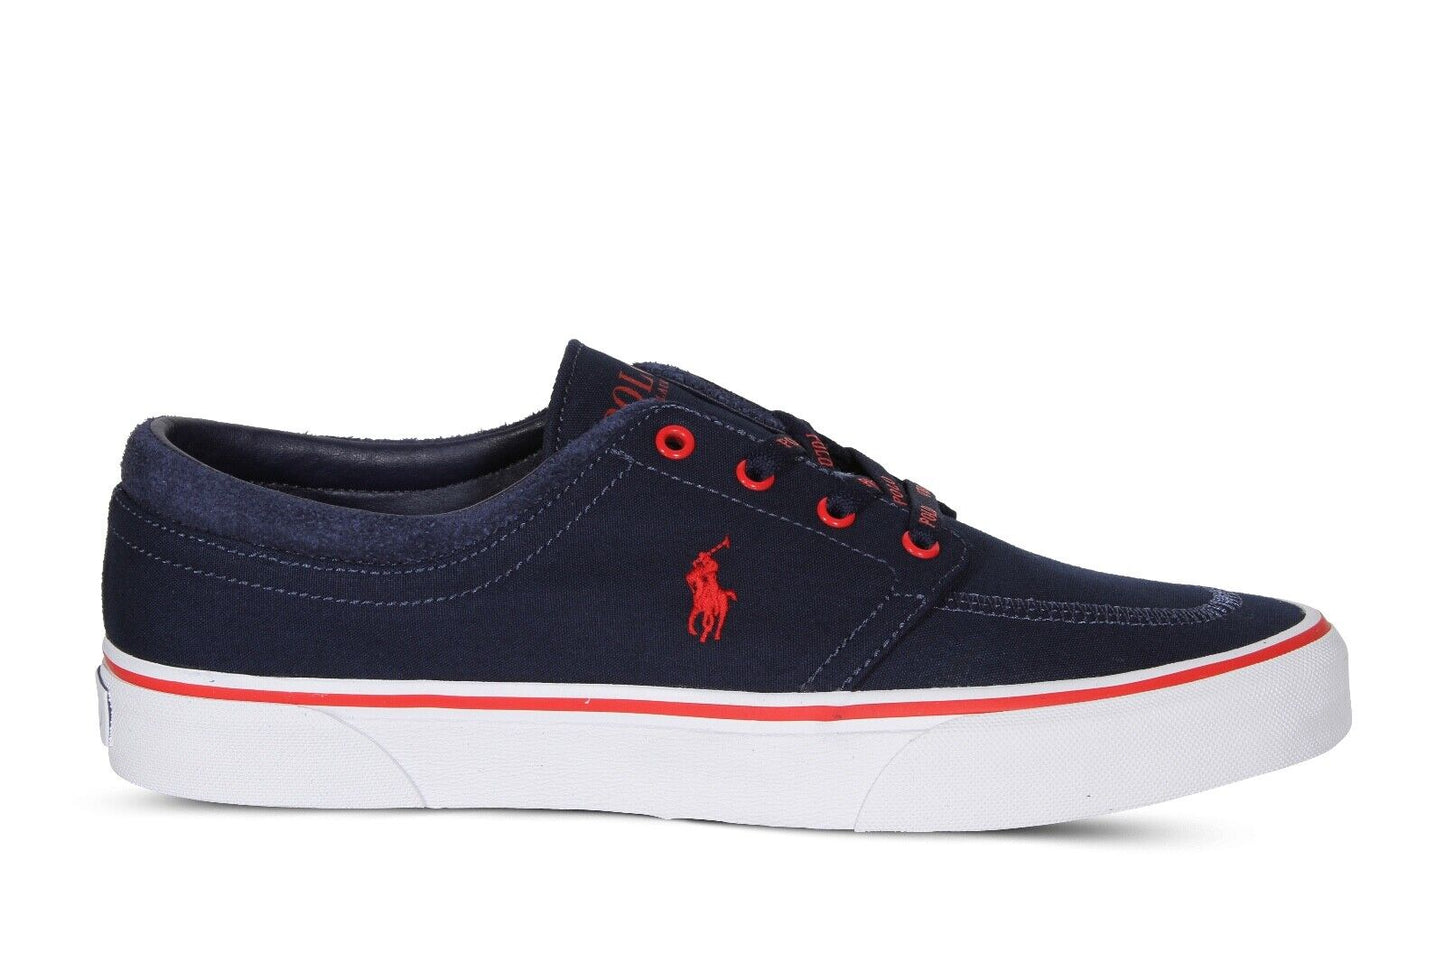 Polo Ralph Lauren Faxon X Men’s Canvas Sneakers in Navy and Red 816841214003